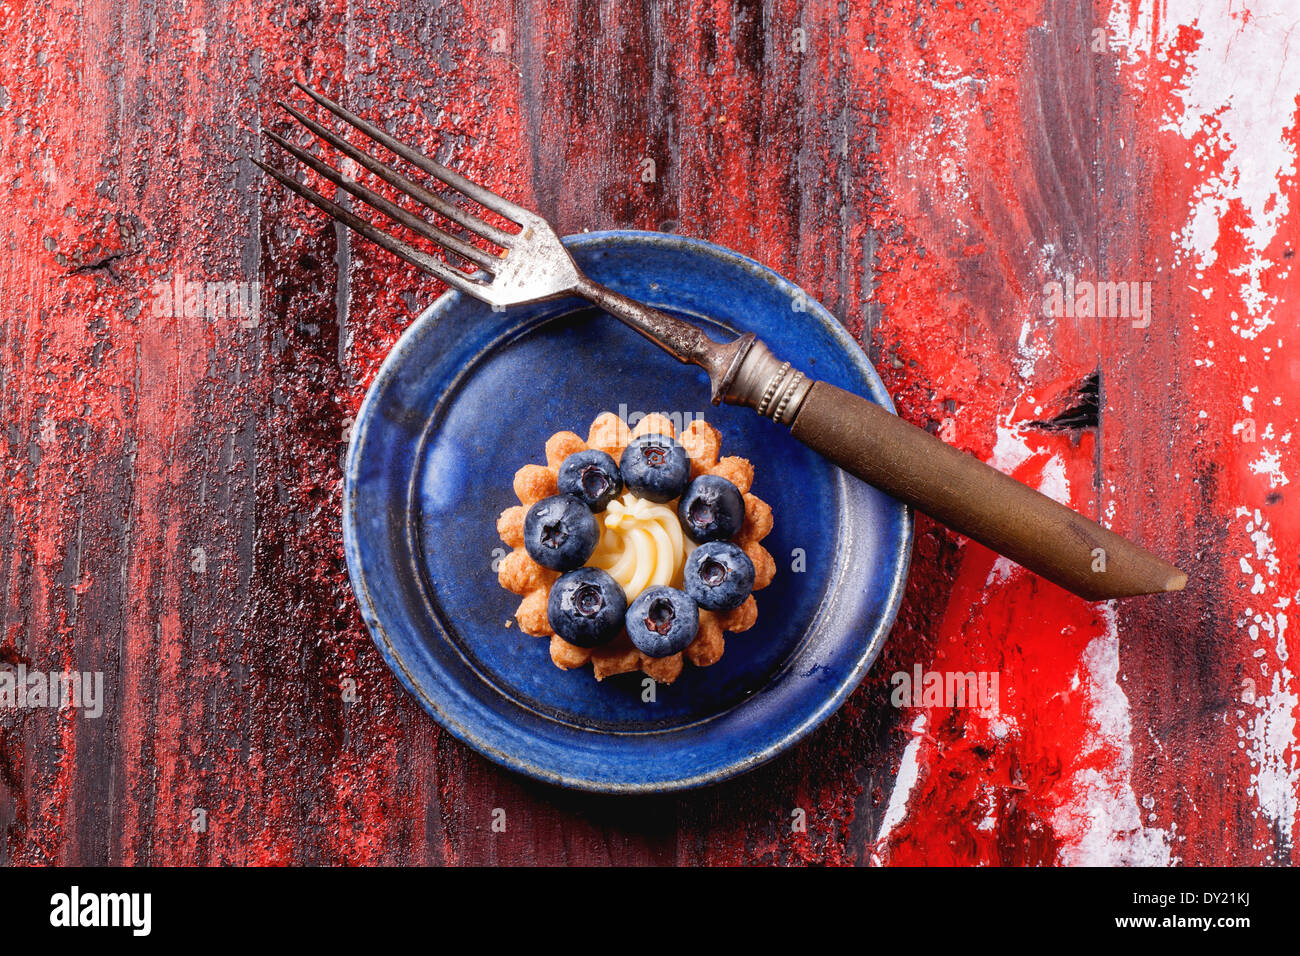 Top view on blueberry mini tart served on blue ceramic plate with vintage fork over black and red wooden background. Stock Photo